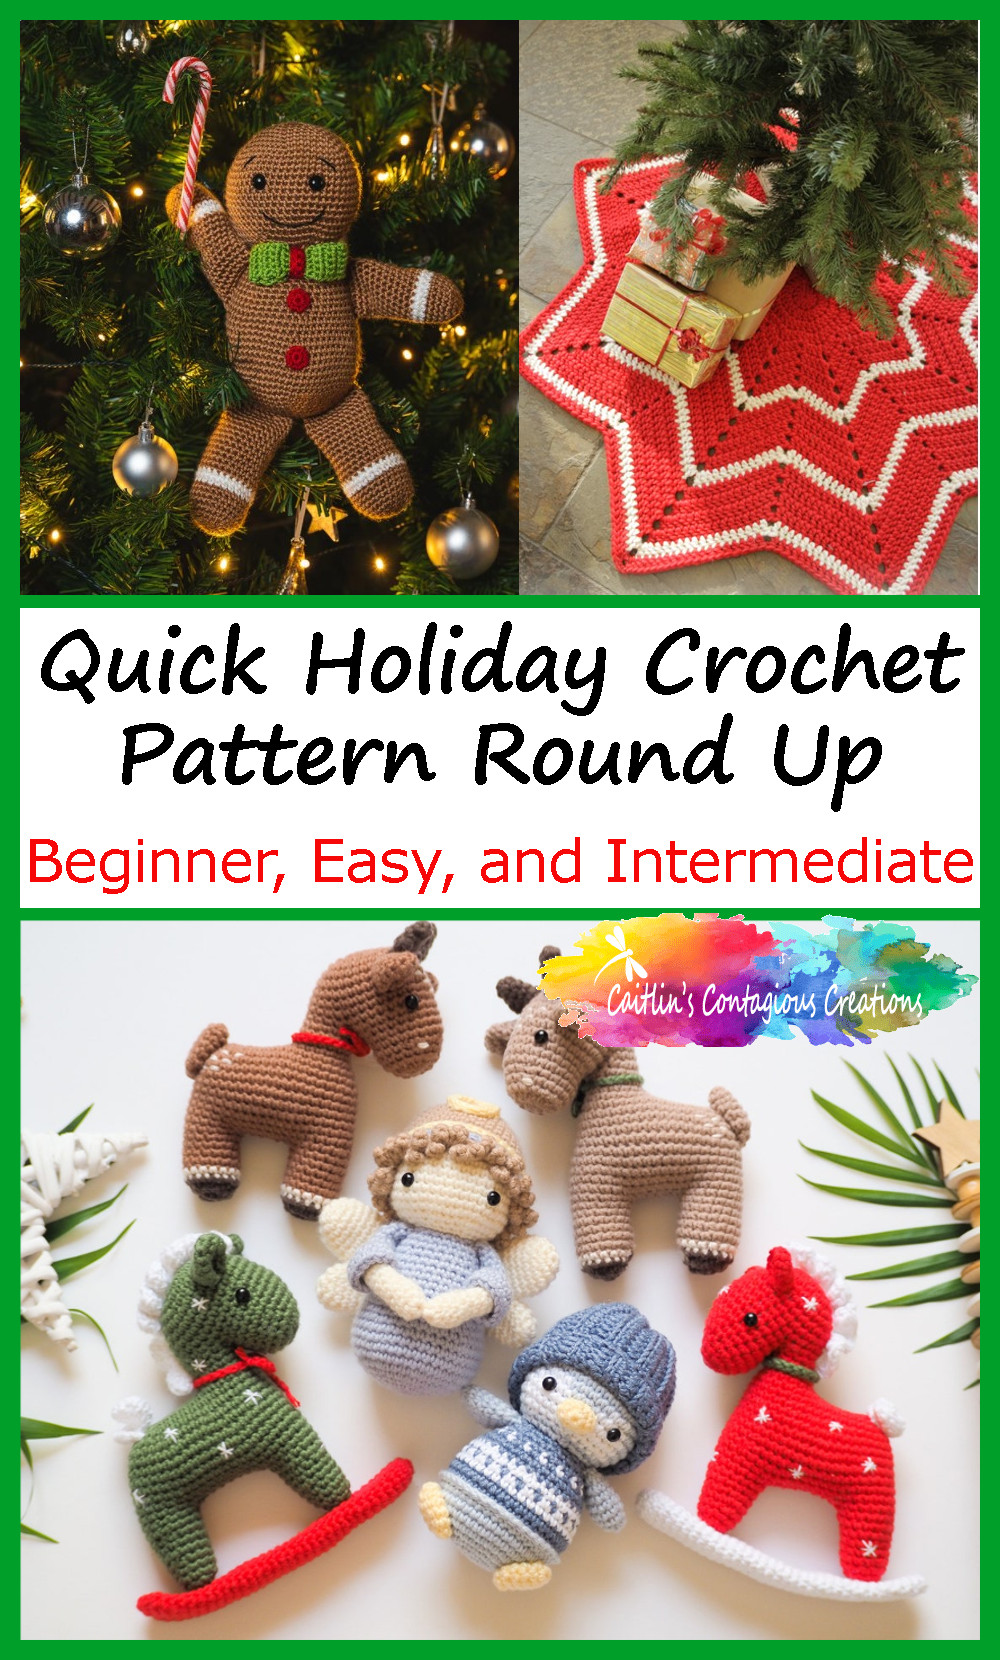 Quick Holiday Crochet Pattern Round Up visible Facebook Image